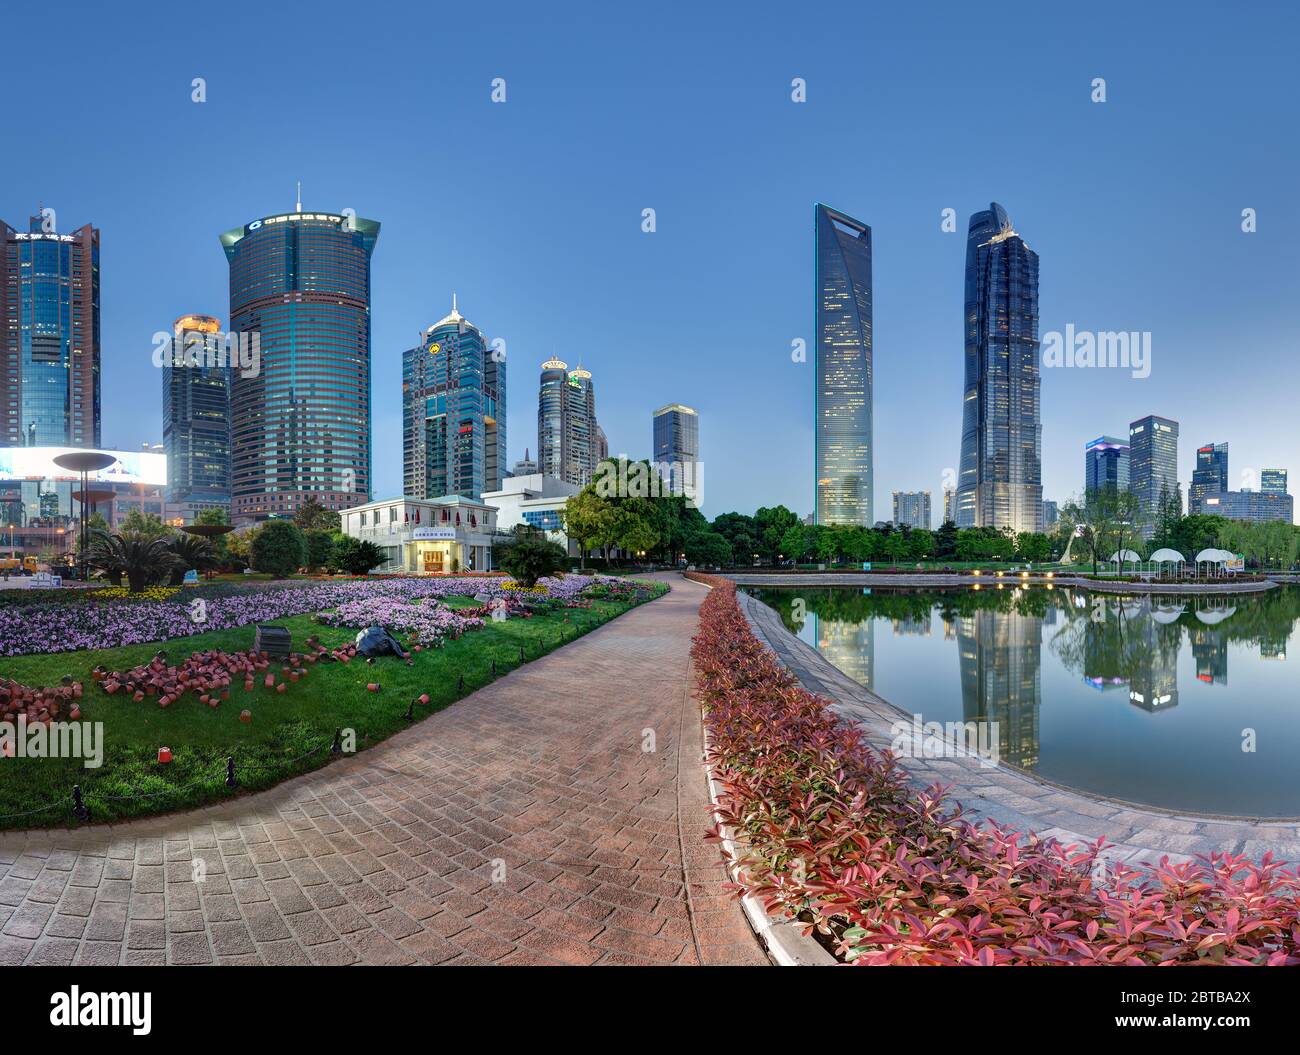 SHANGHAI, CHINA - APRIL 21, 2015: Skyline of Pudong financial center at dusk. Famous towers are visible in water reflection. Left part, can be combine Stock Photo